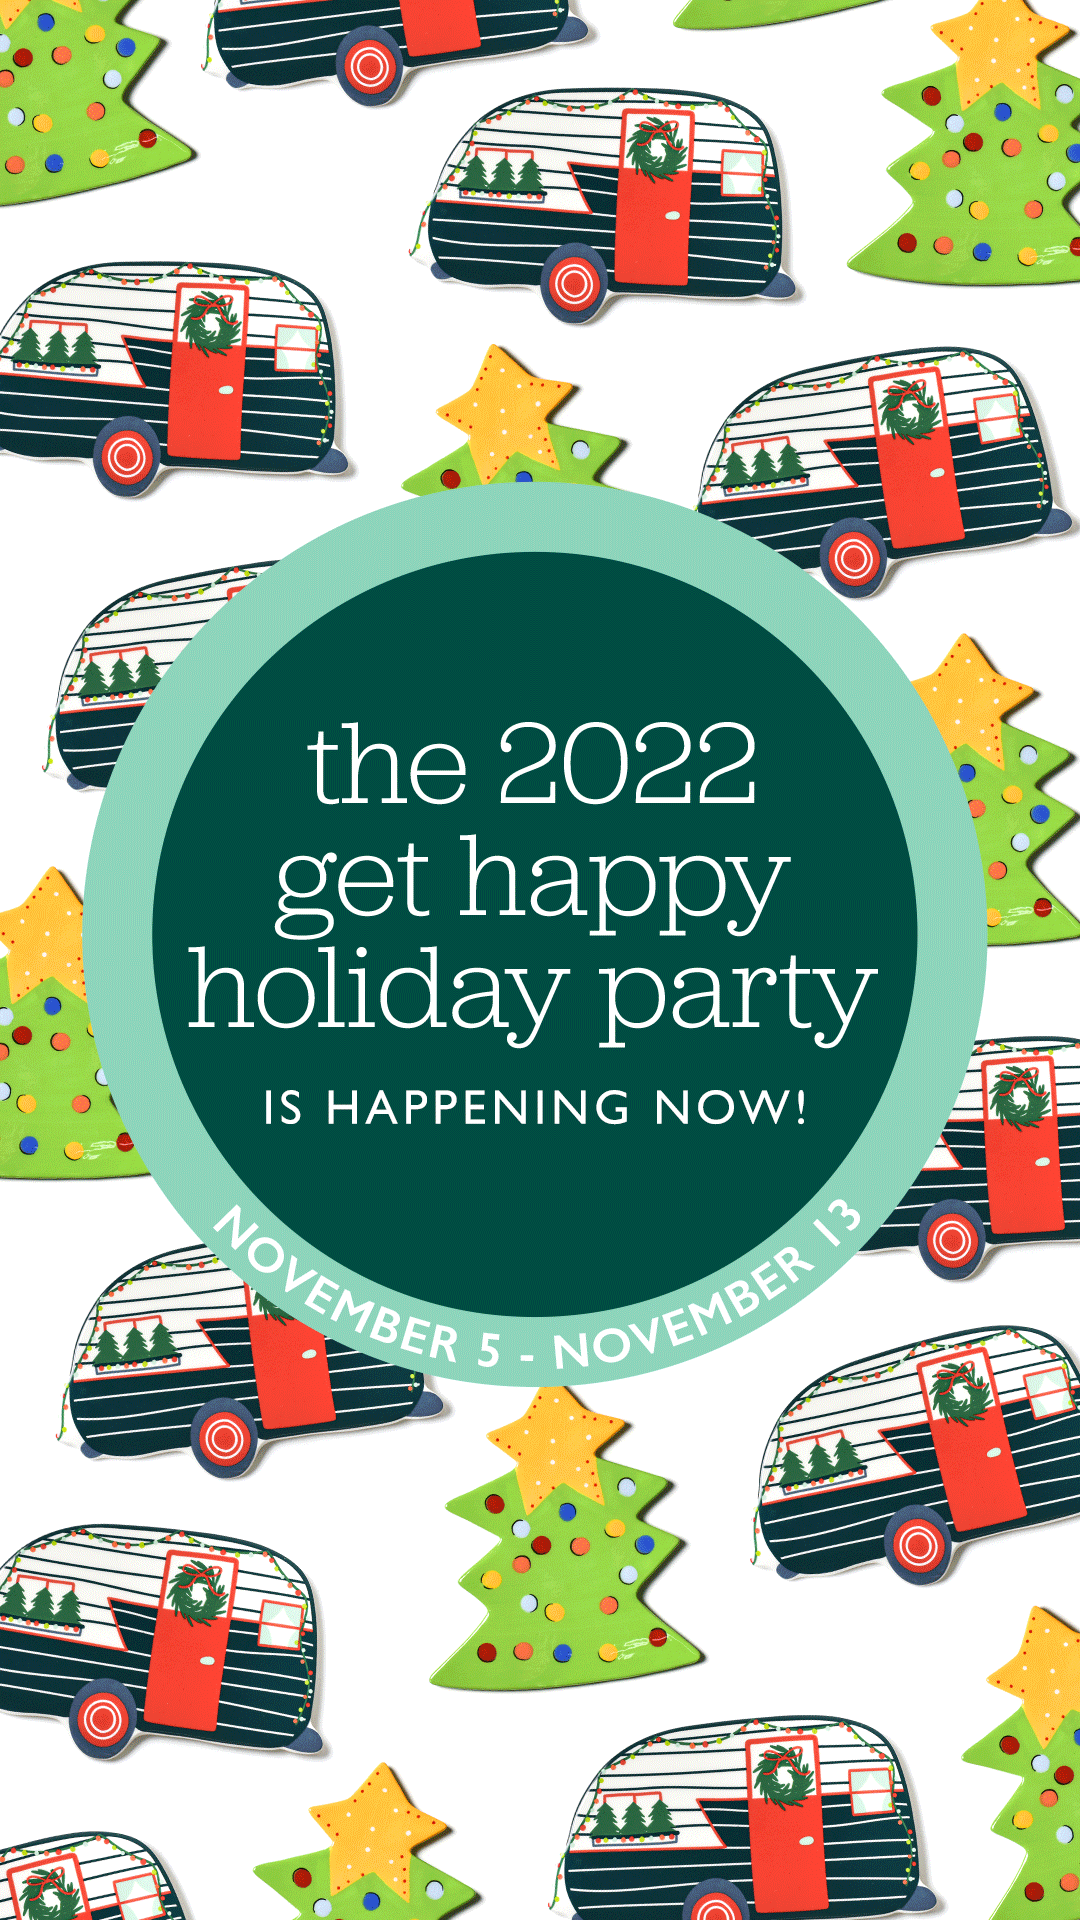 2022---CAM---HEV-Paid-Socials_AdStory_Get-Happy-Holiday-Party_Attachment-Collage-Animated.gif